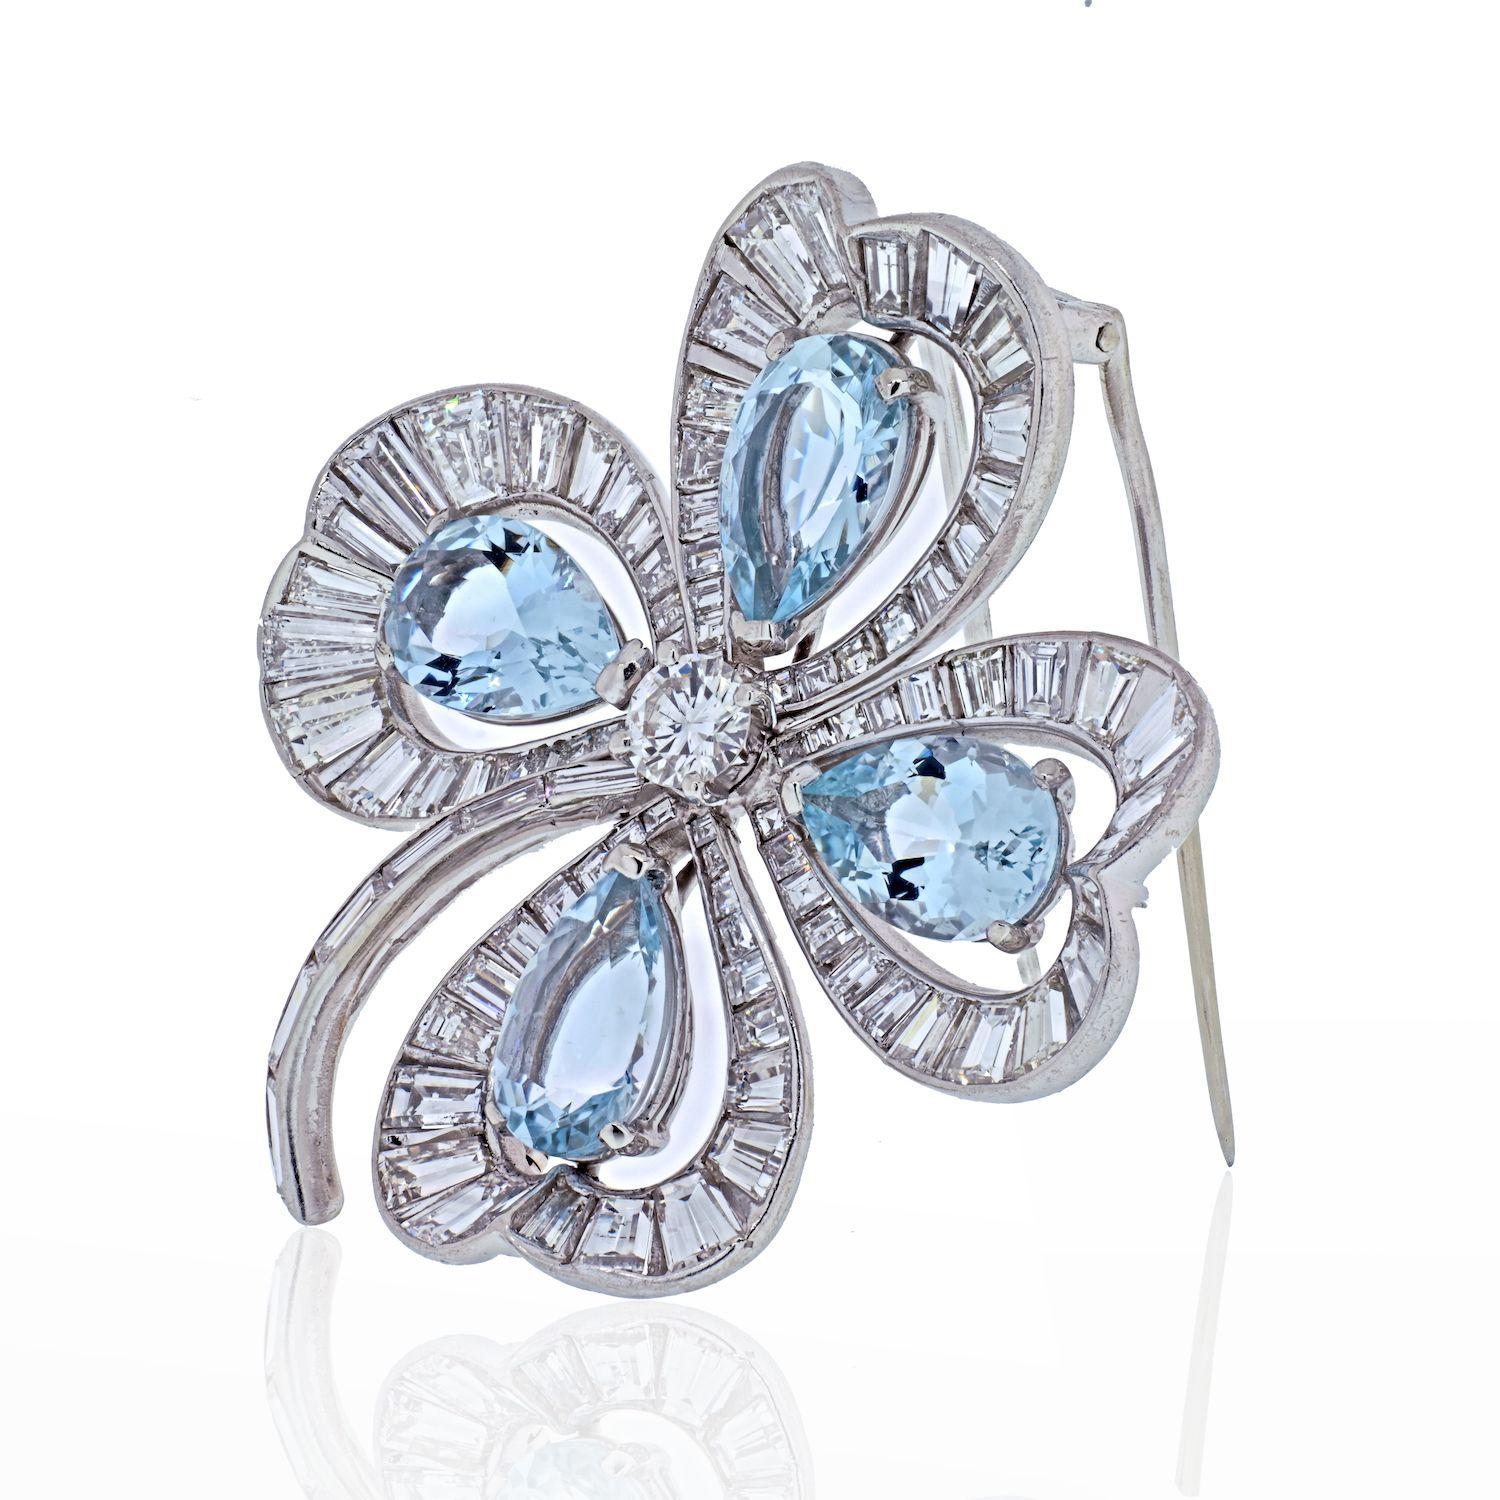 Platinum Four Leaf Clover With Aquamarines And Diamonds Brooch.
Center diamond: Round Cut 5.3mm wide (approx. 0.67ct)
Diamond Carat Weight:11.67cttw
Aquamarine Carat Weight: 10.12cttw
Measurmeents: 49mm wide and 46mm long. 
Closure: Double pin